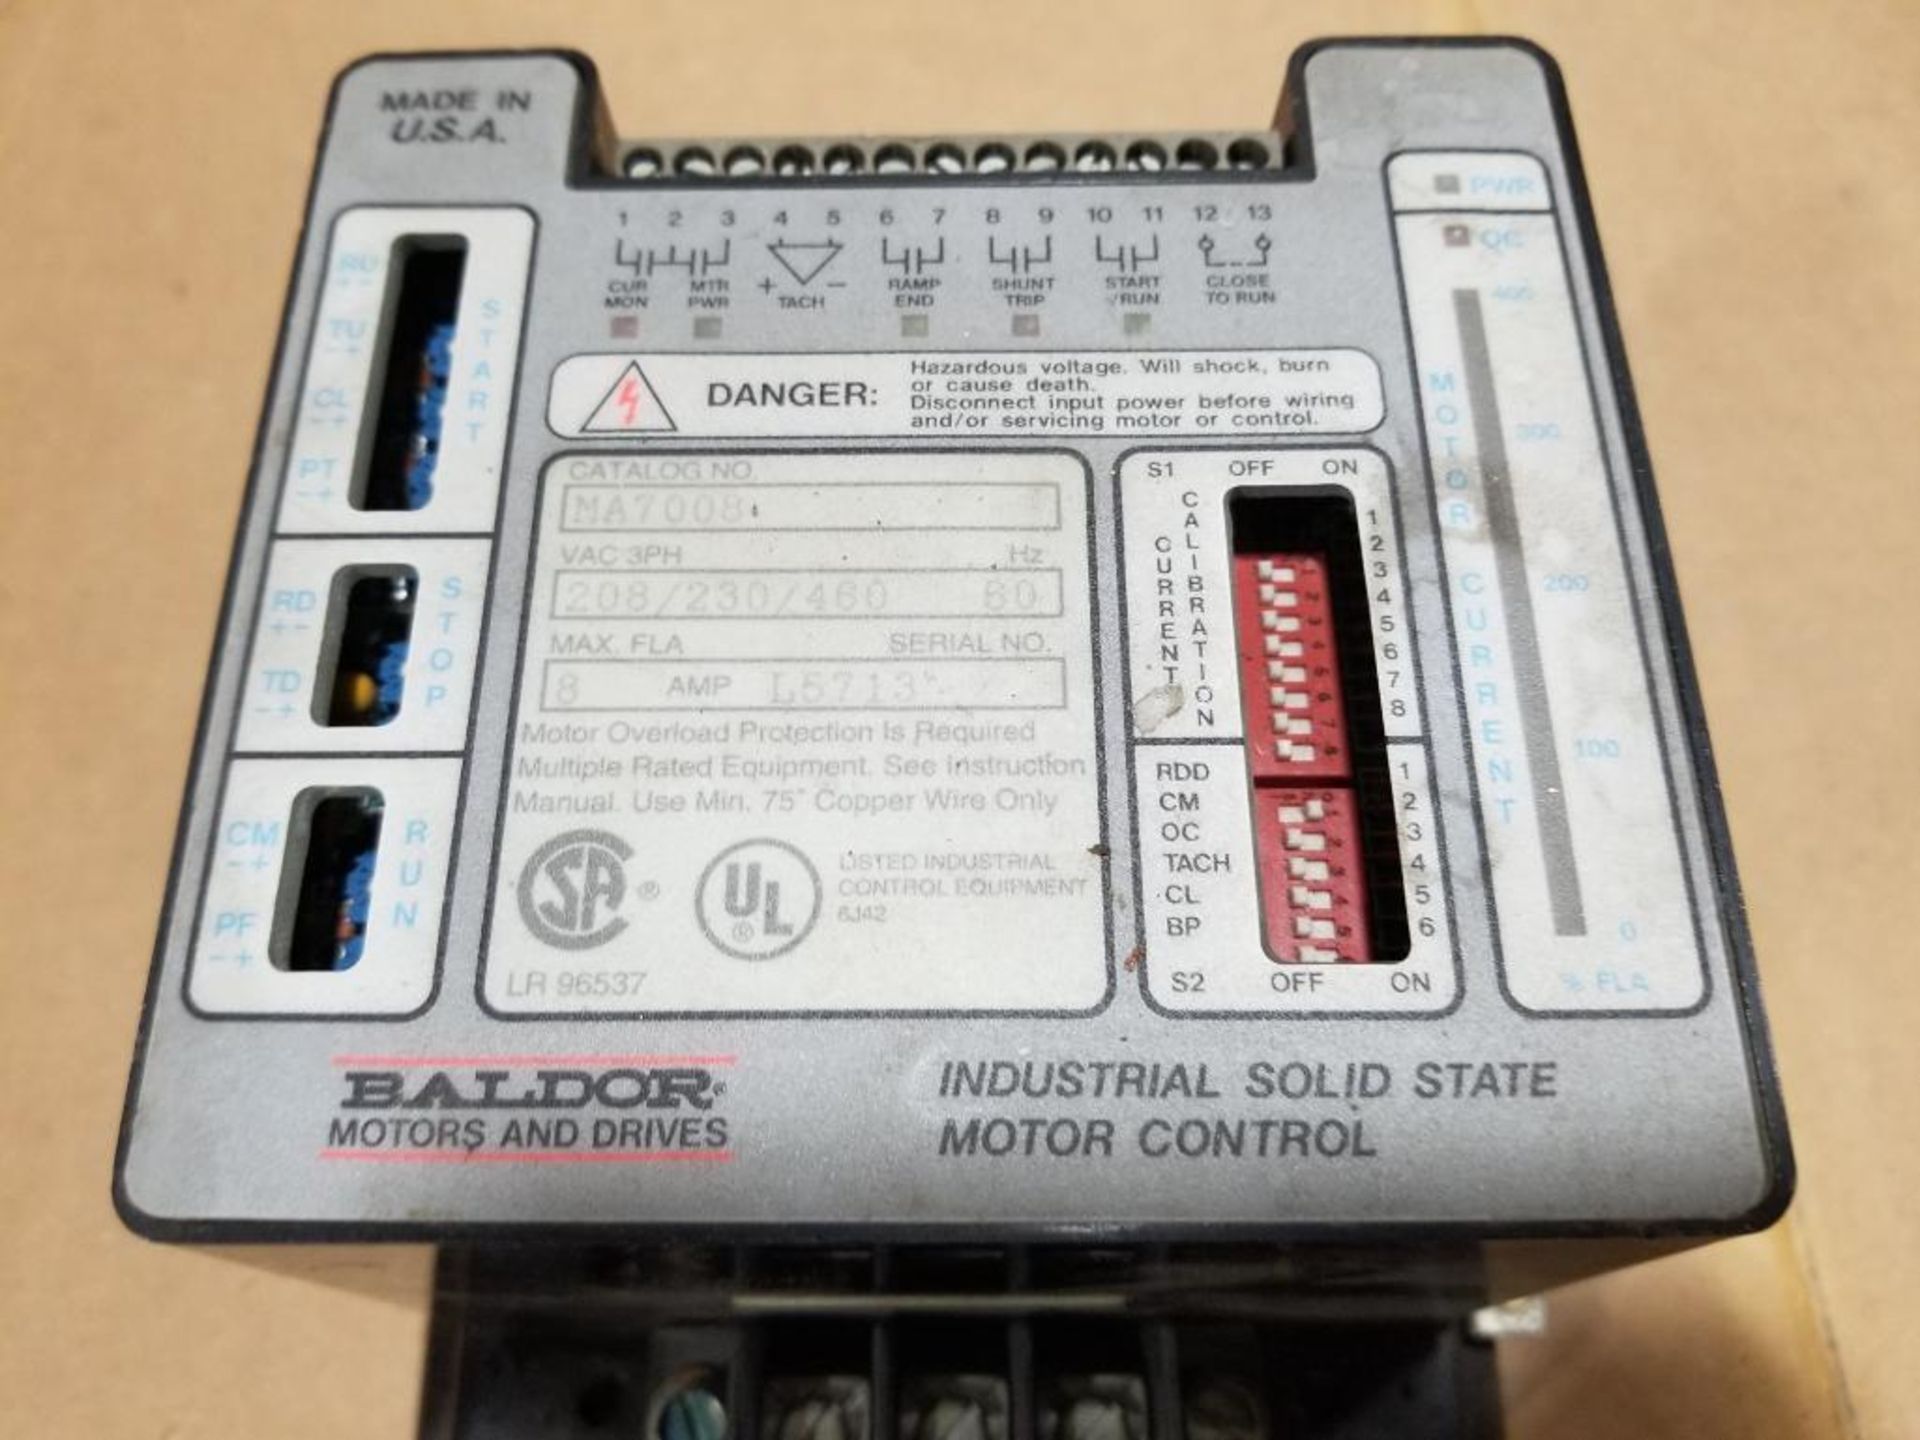 Baldor motors and drives. Industrial Solid State Motor Control. Catalog MA7008. - Image 2 of 6